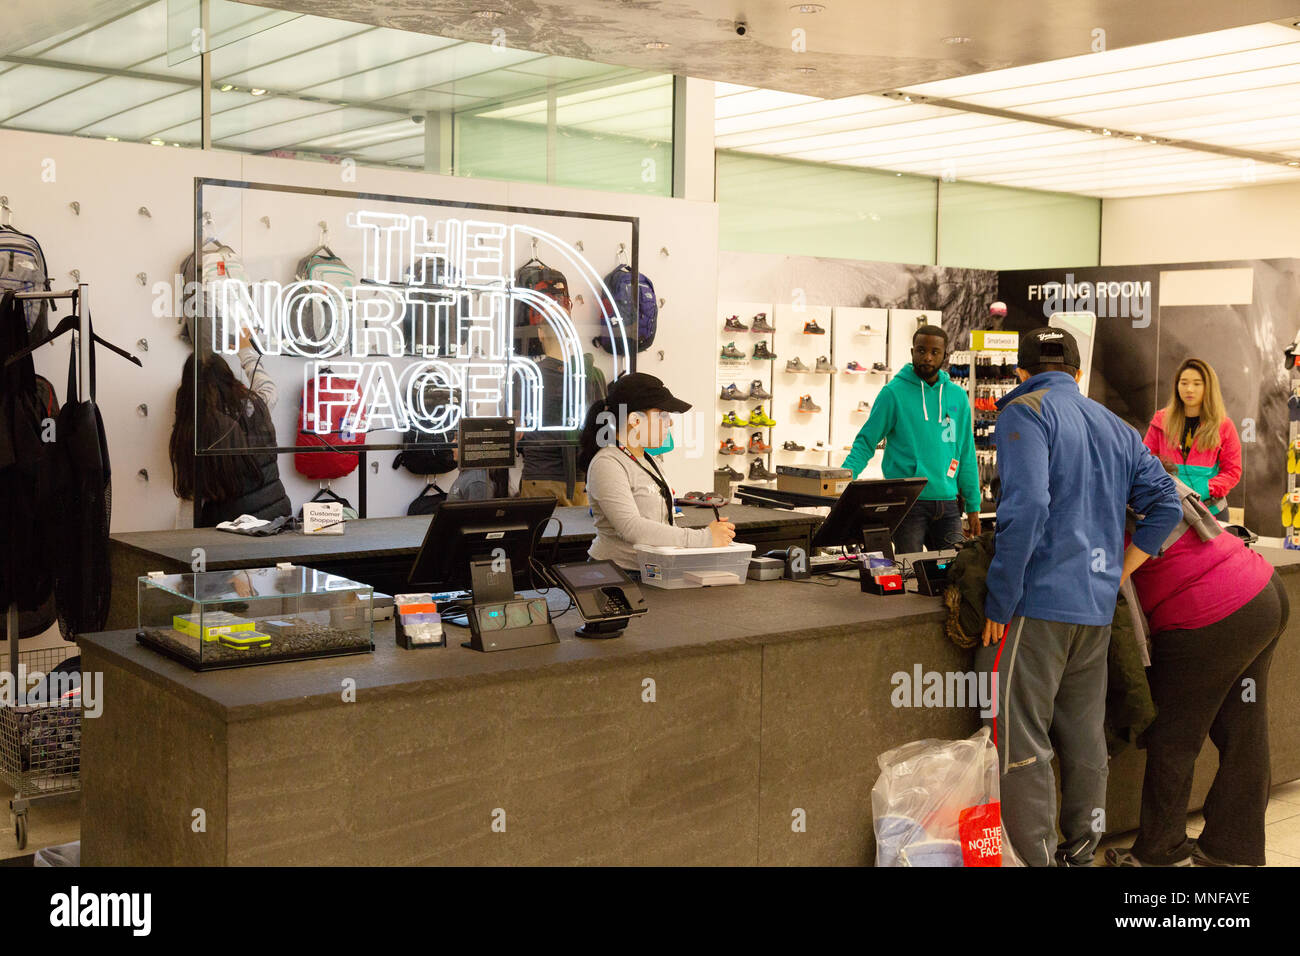 People shopping, buying clothing at the checkout,  The North Face store, 5th Avenue, New York, USA Stock Photo